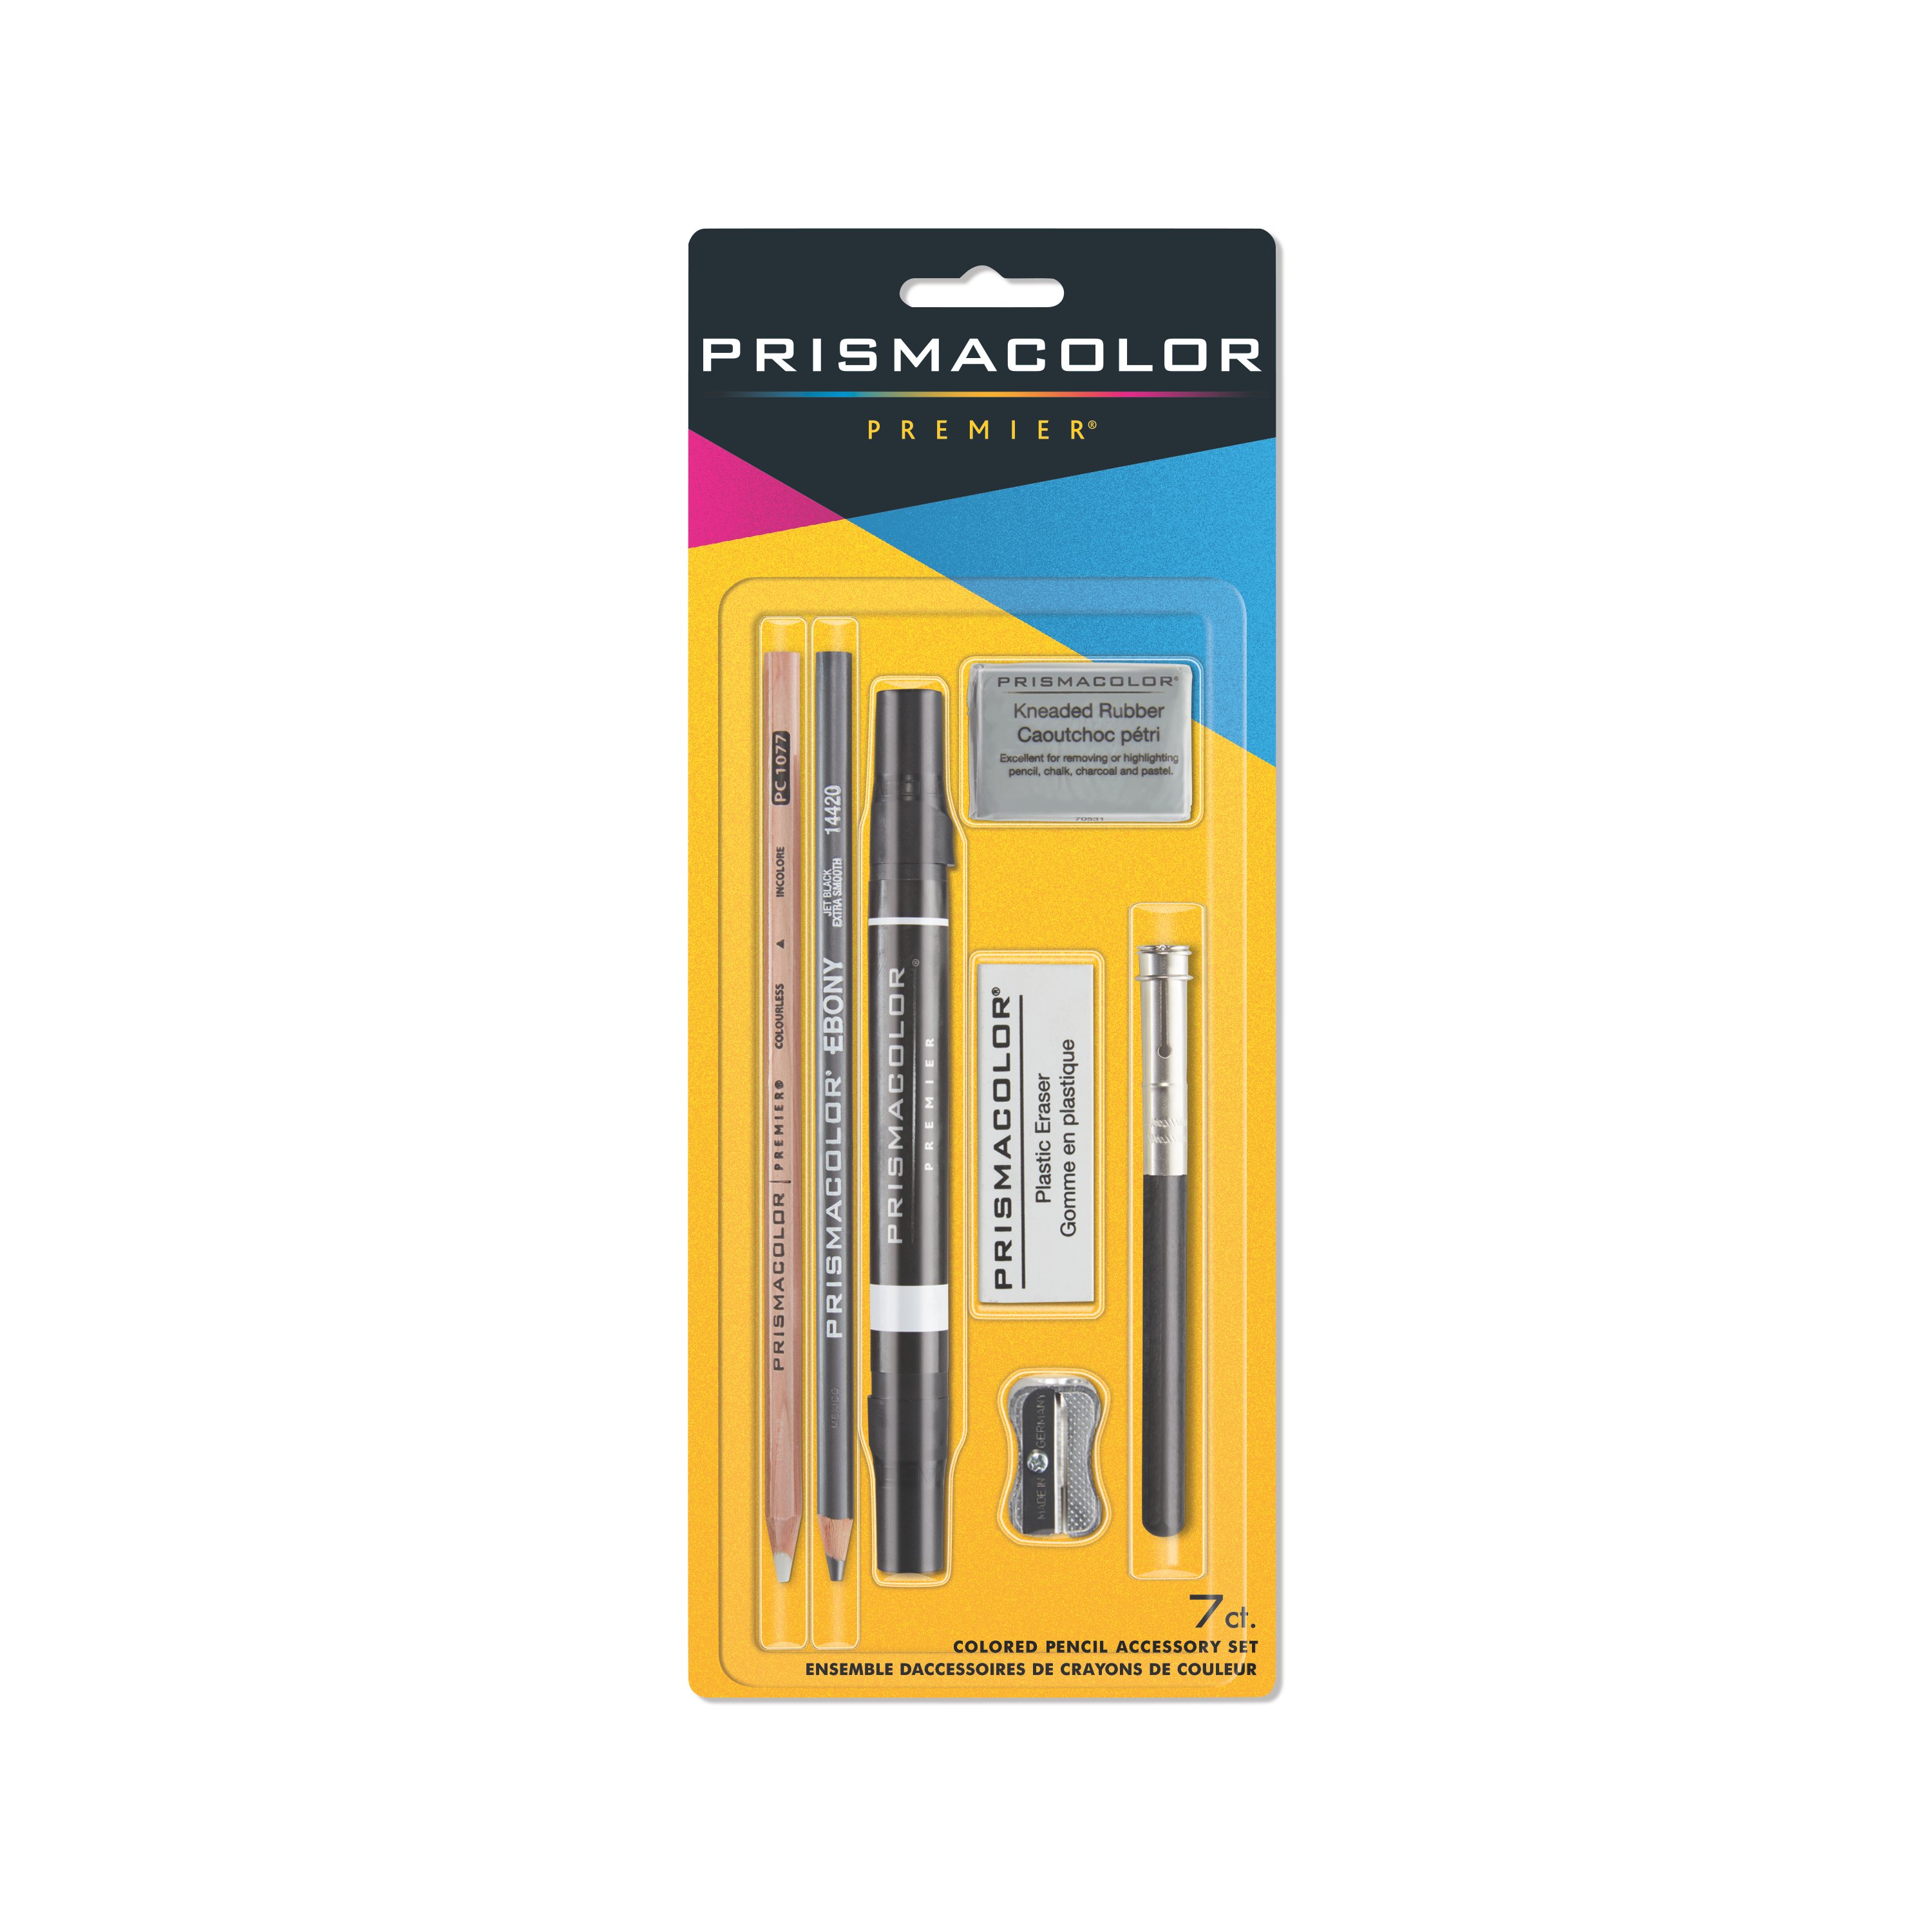 https://s7d9.scene7.com/is/image/NewellRubbermaid/2074617-wace-prismacolor-accessory-kit-7ct-in-pack-1